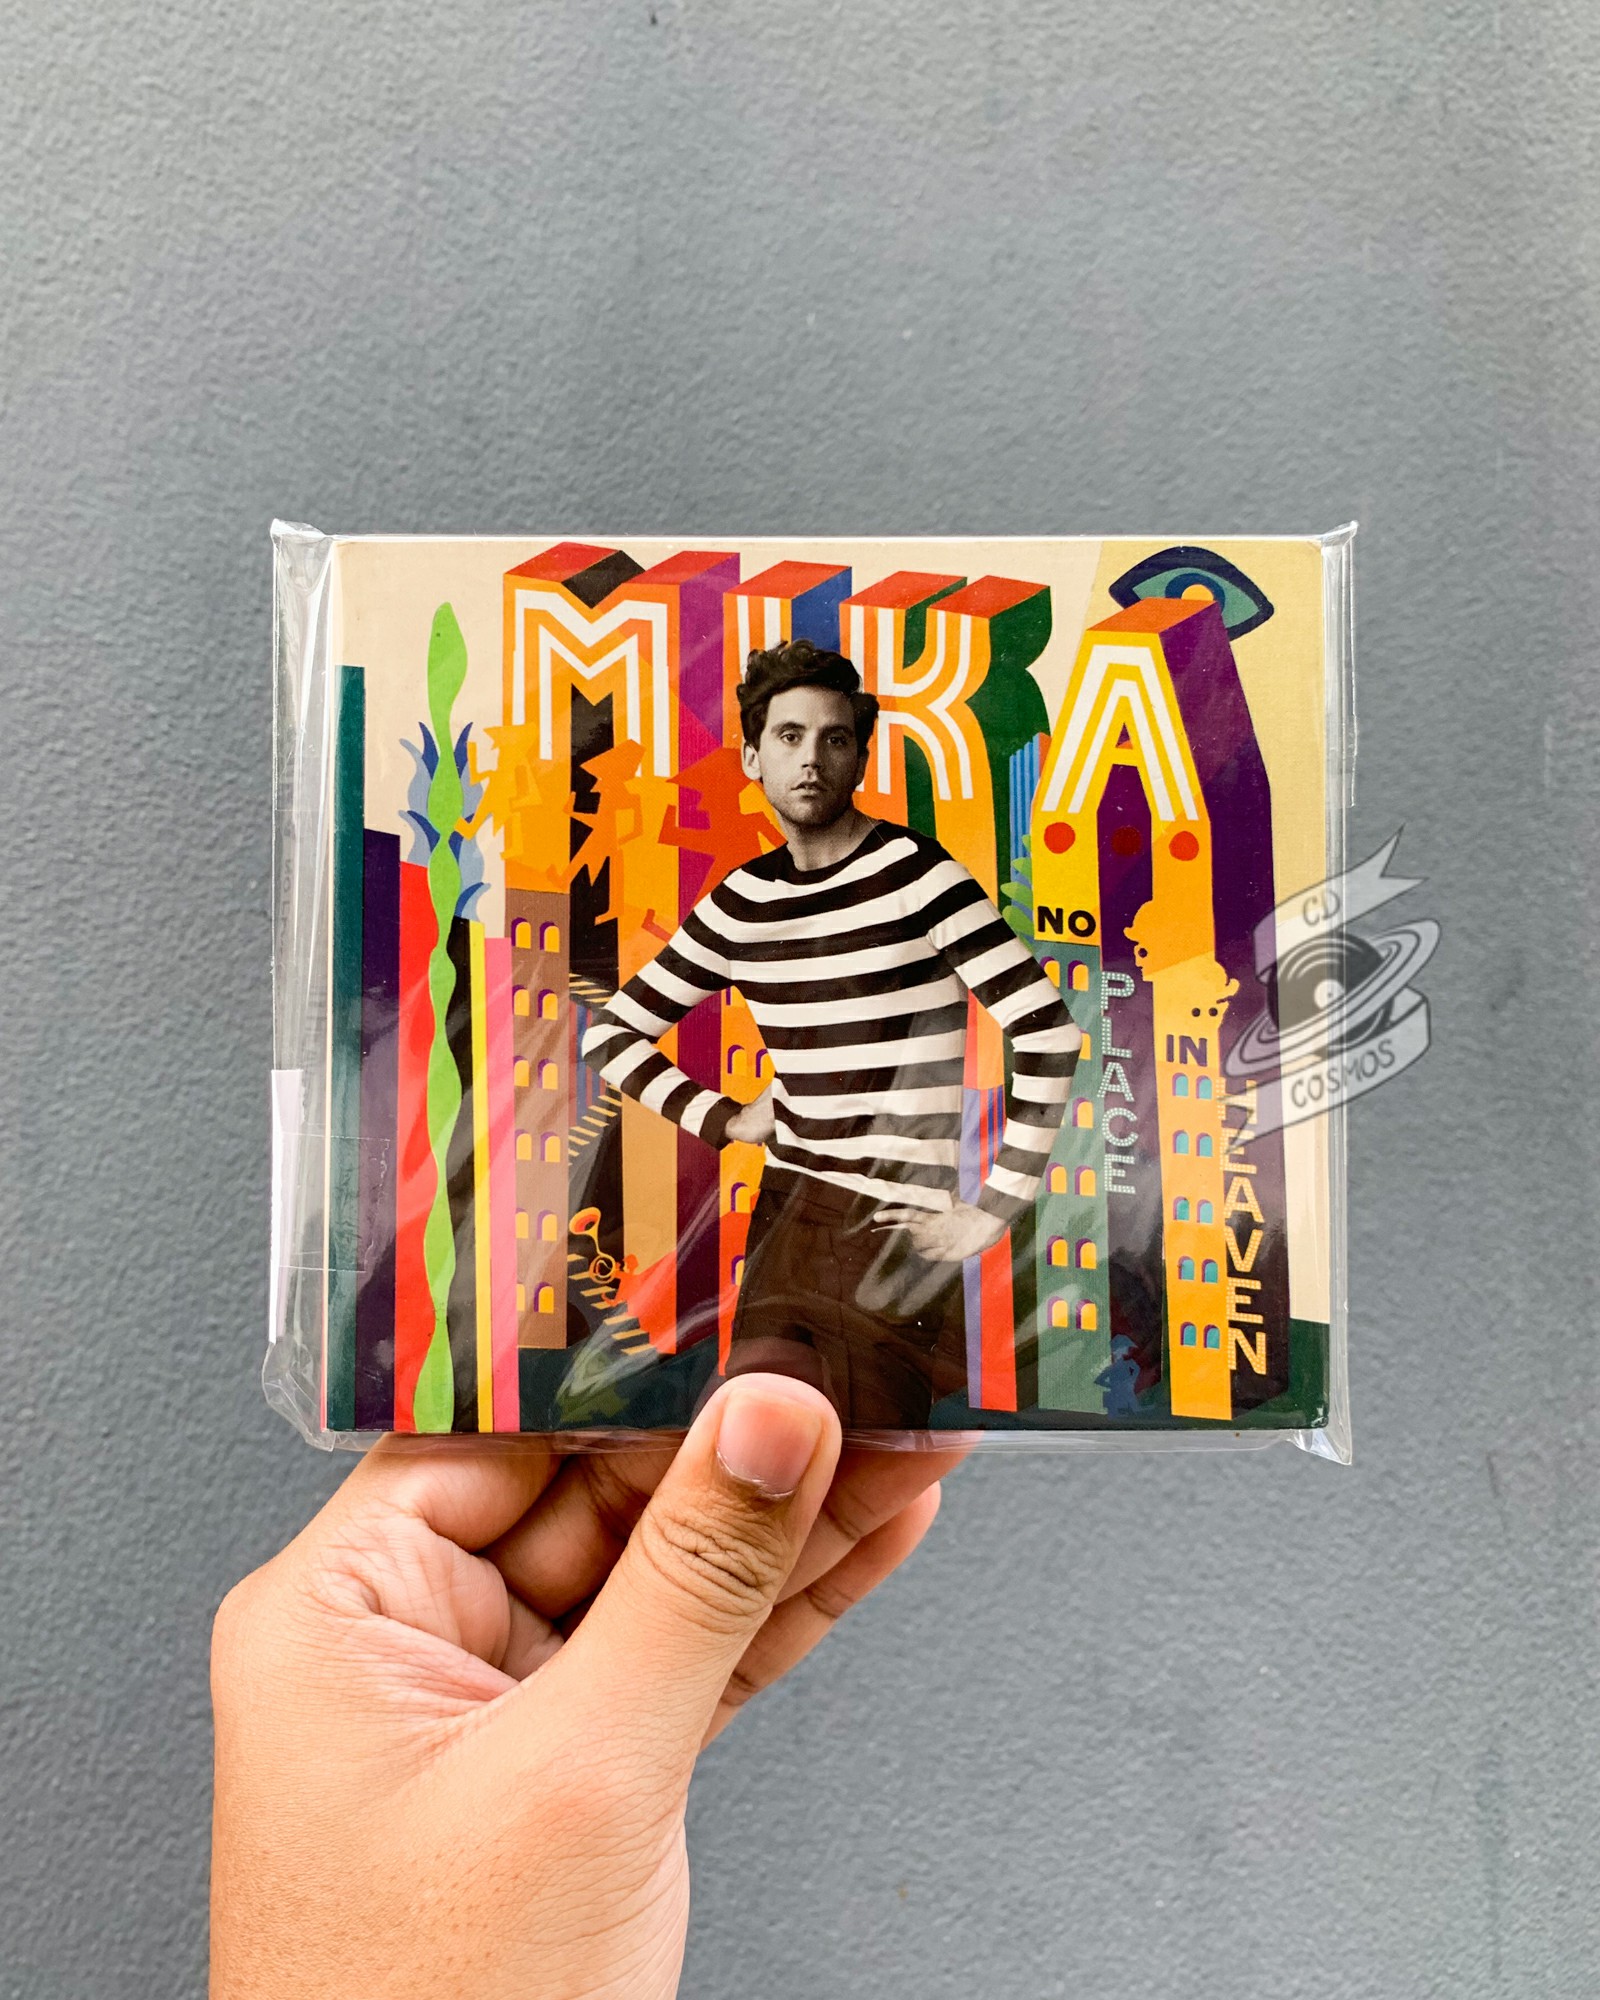 MIKA NO PLACE IN HEAVEN CD